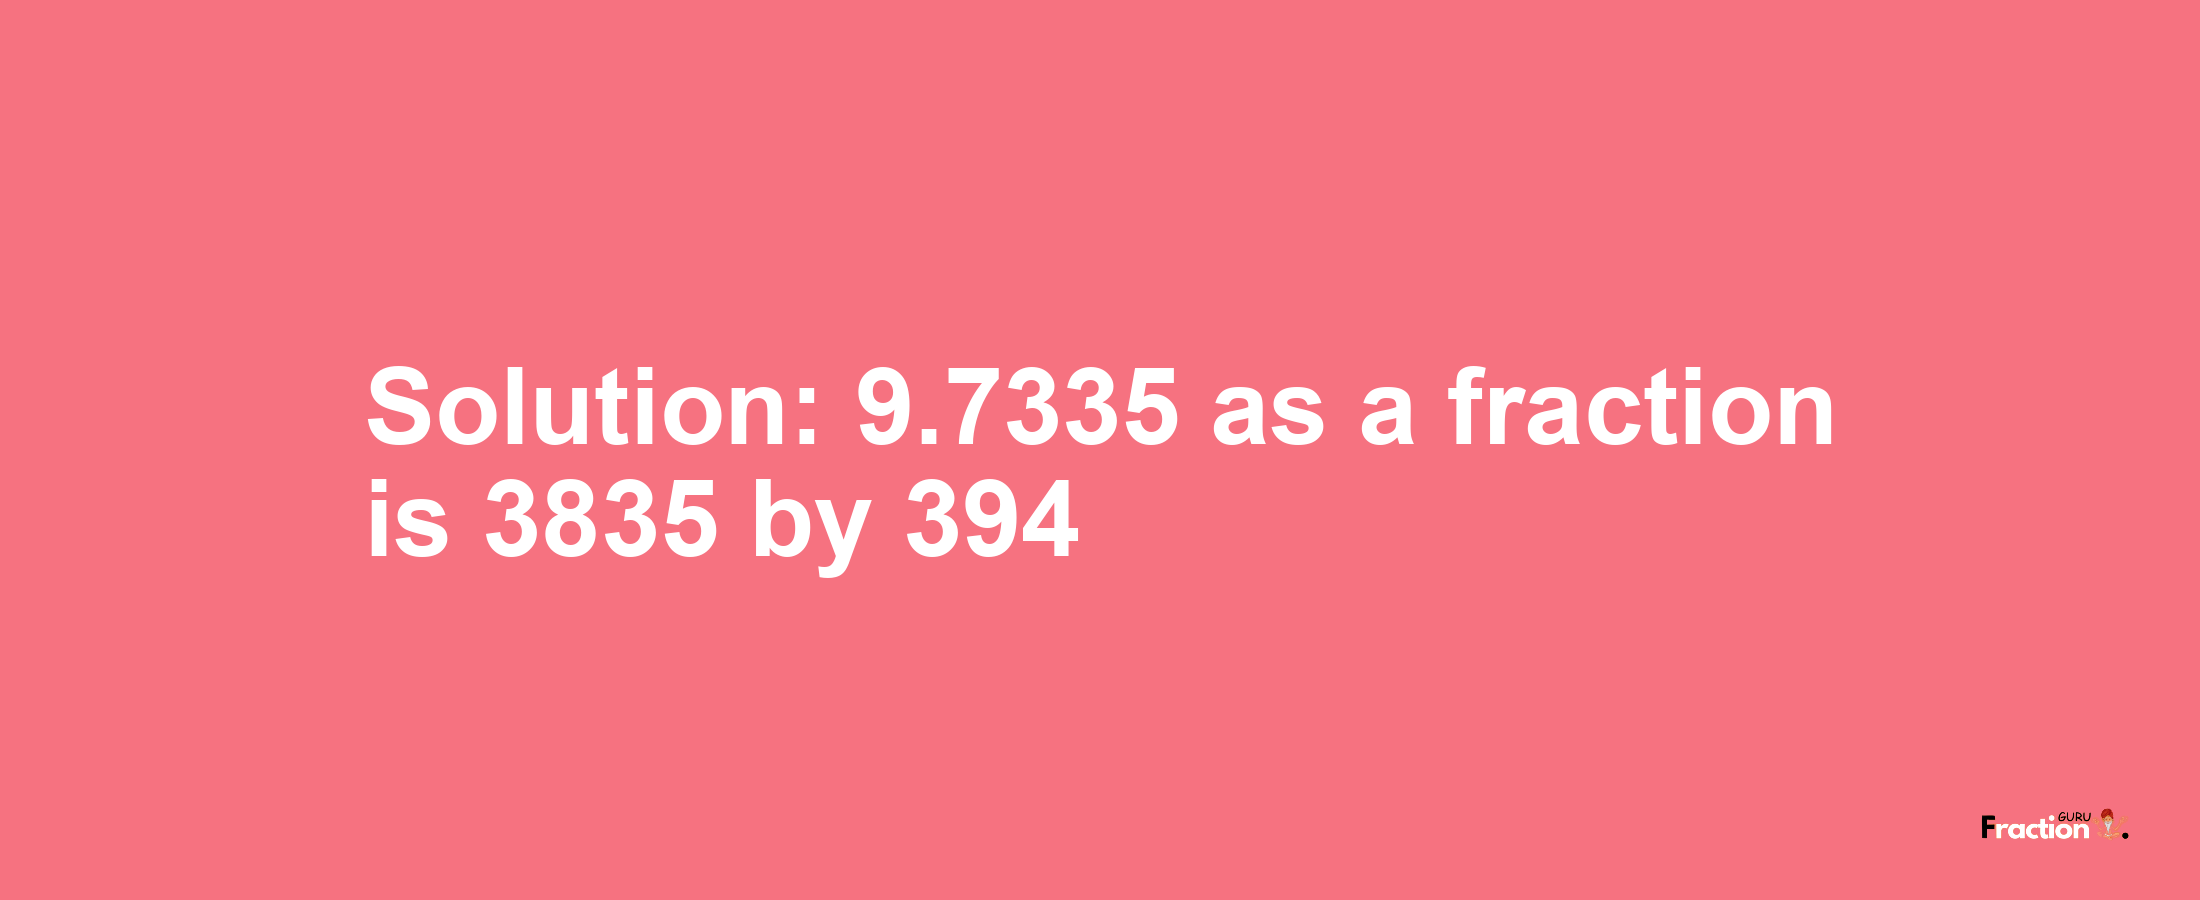 Solution:9.7335 as a fraction is 3835/394